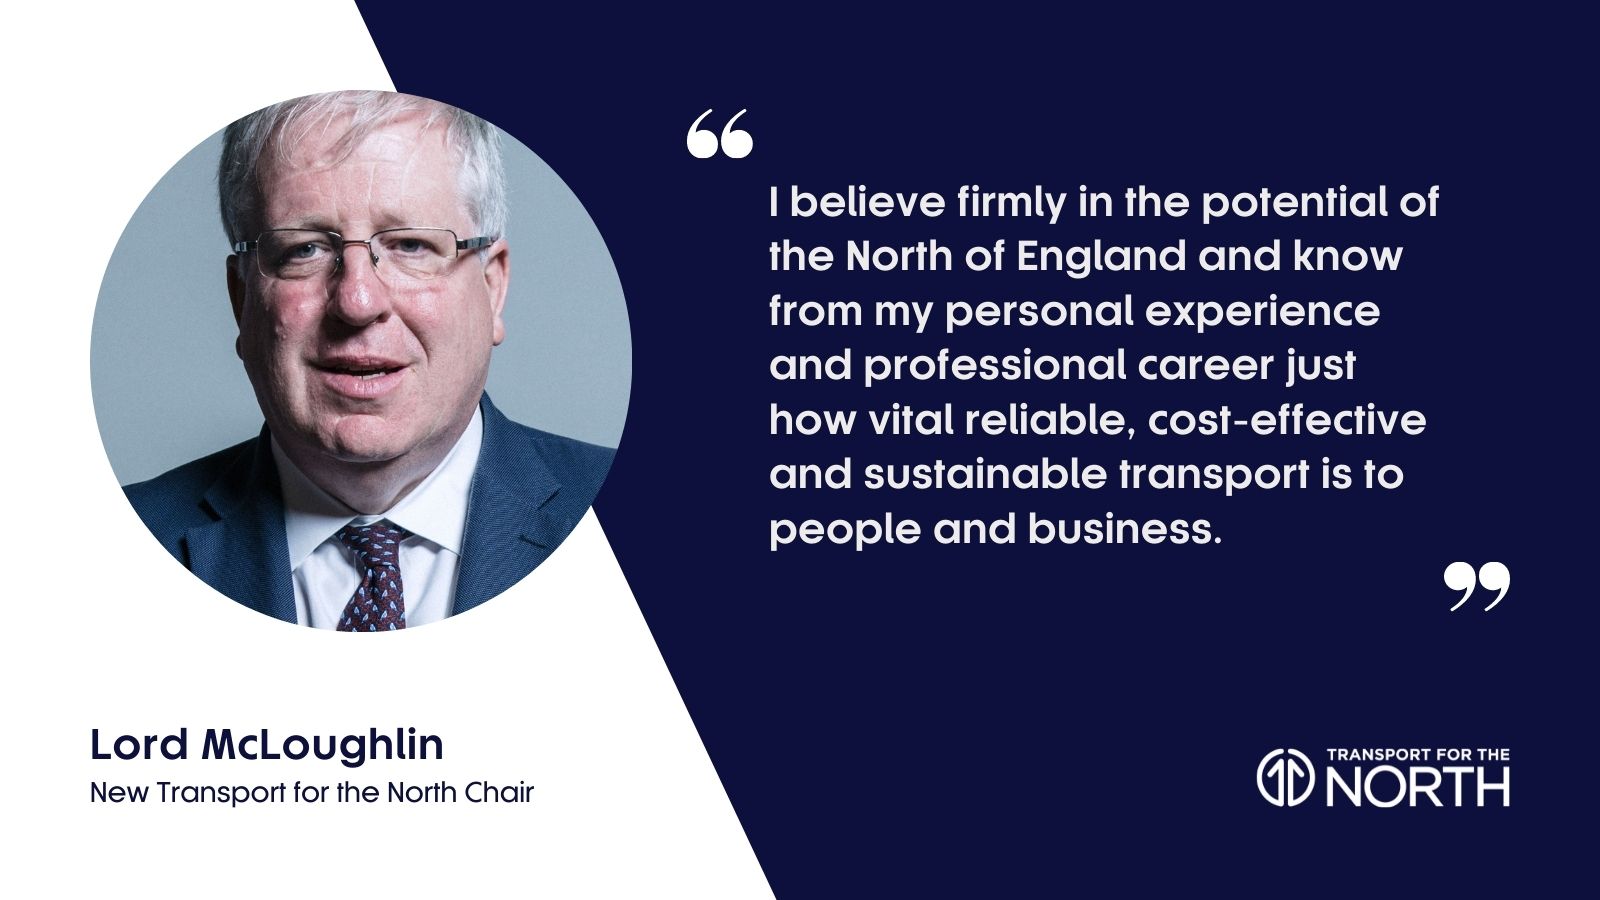 Lord McLoughlin confirmed as Chair of Transport for the North